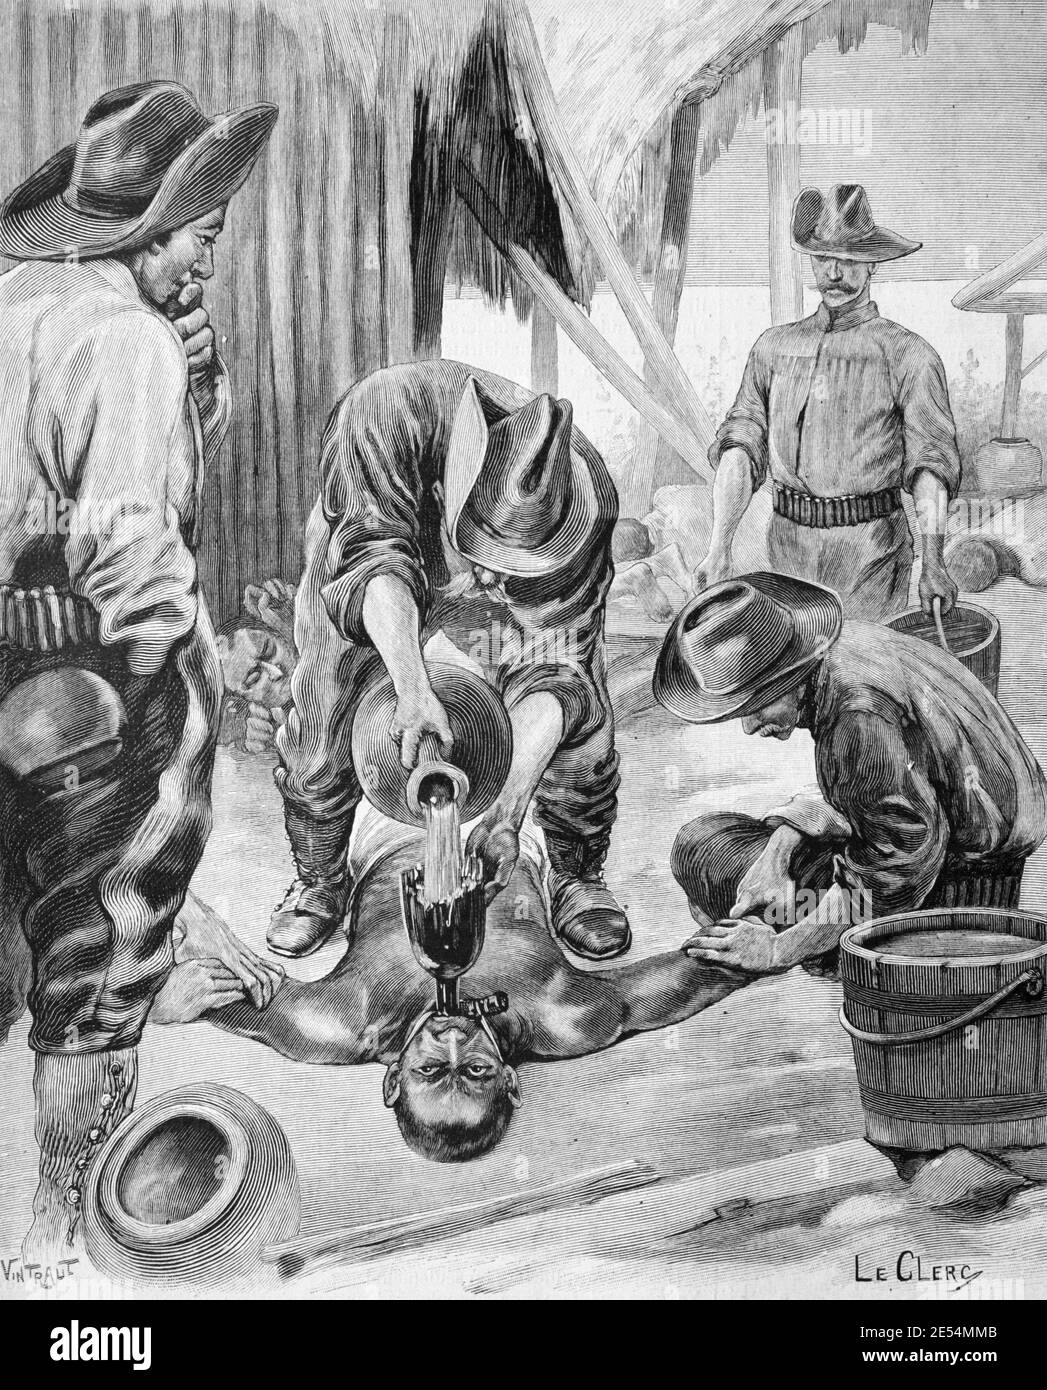 Water Torture in the Philippines used against Filipinos by American forces during the Philippine-American War (1899-1902) 1902 Vintage Illustration or Engraving Stock Photo